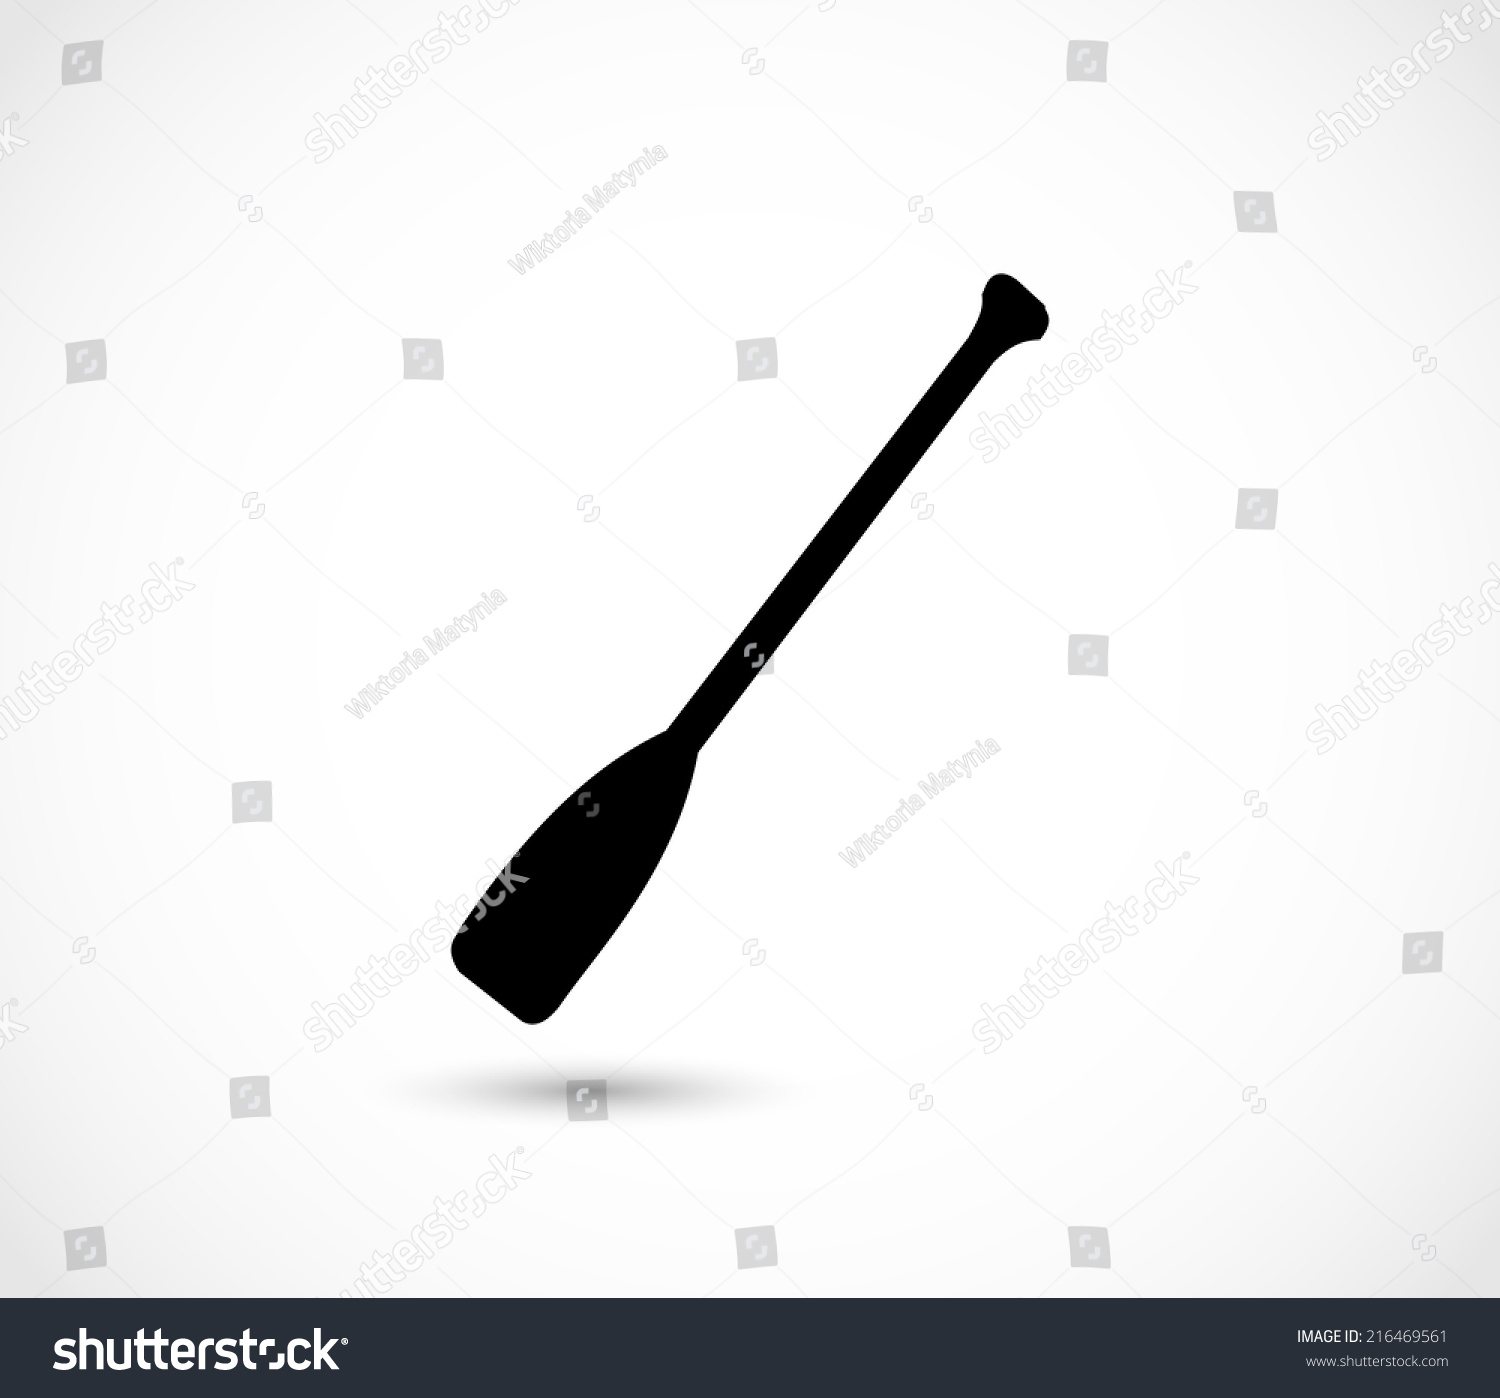 Paddle Icon Vector Stock Vector 216469561 - Shutterstock